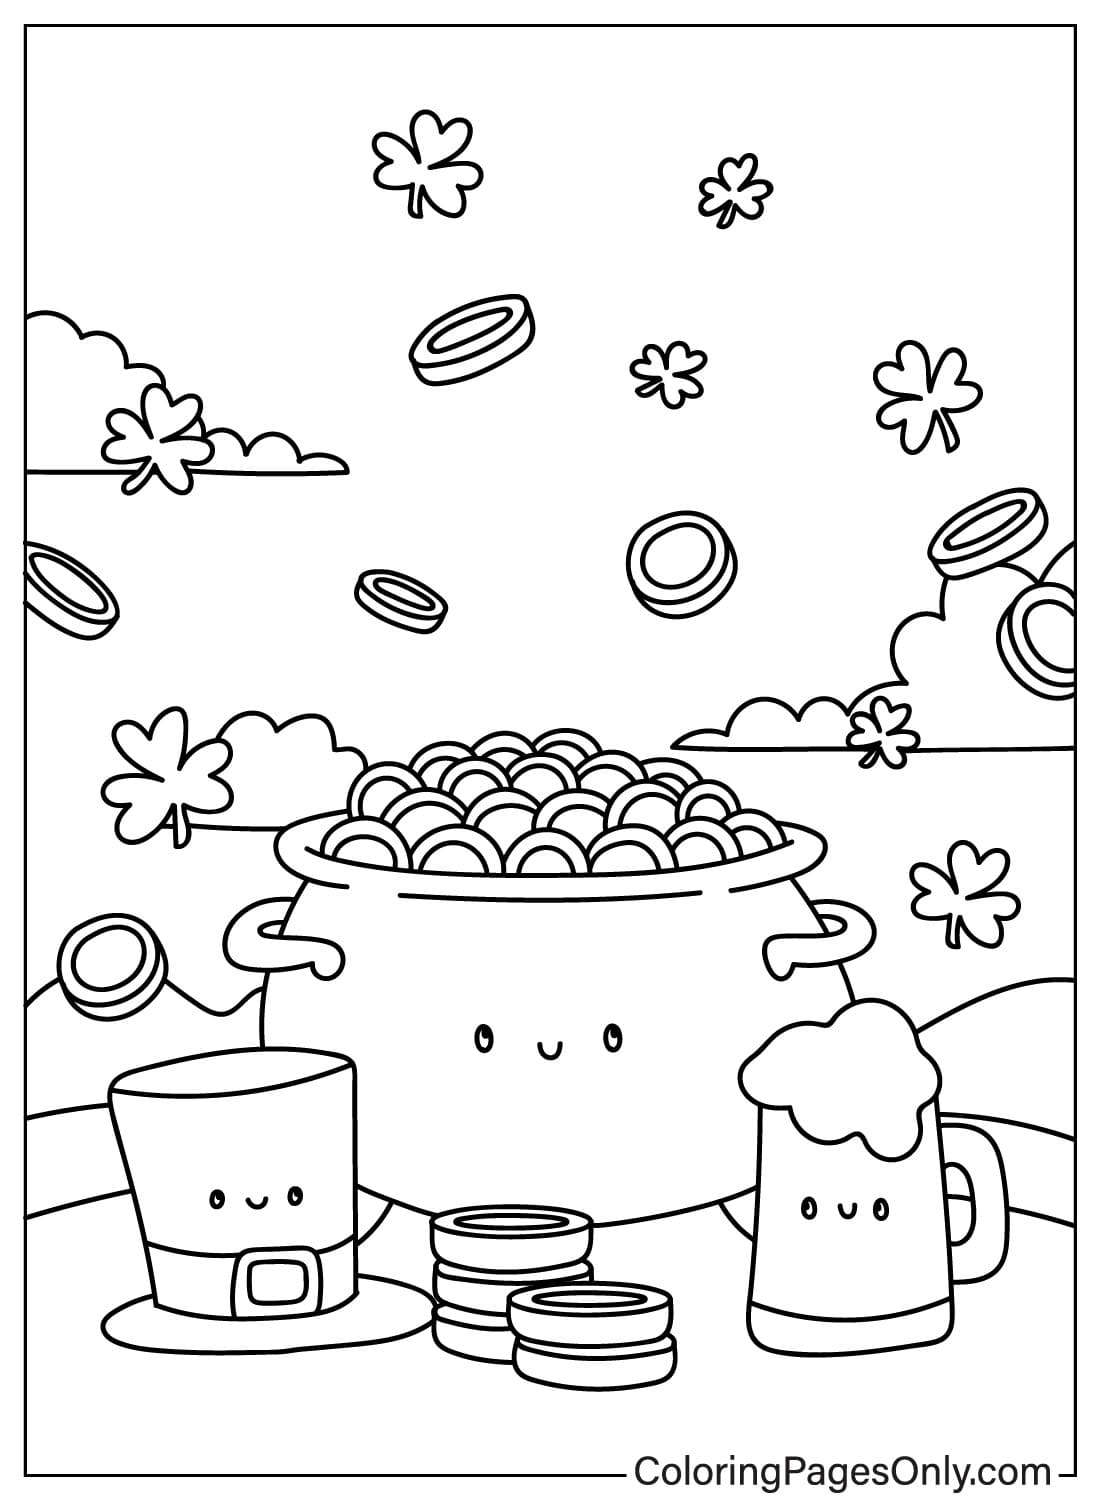 Free Printable Pot of Gold Coloring Page